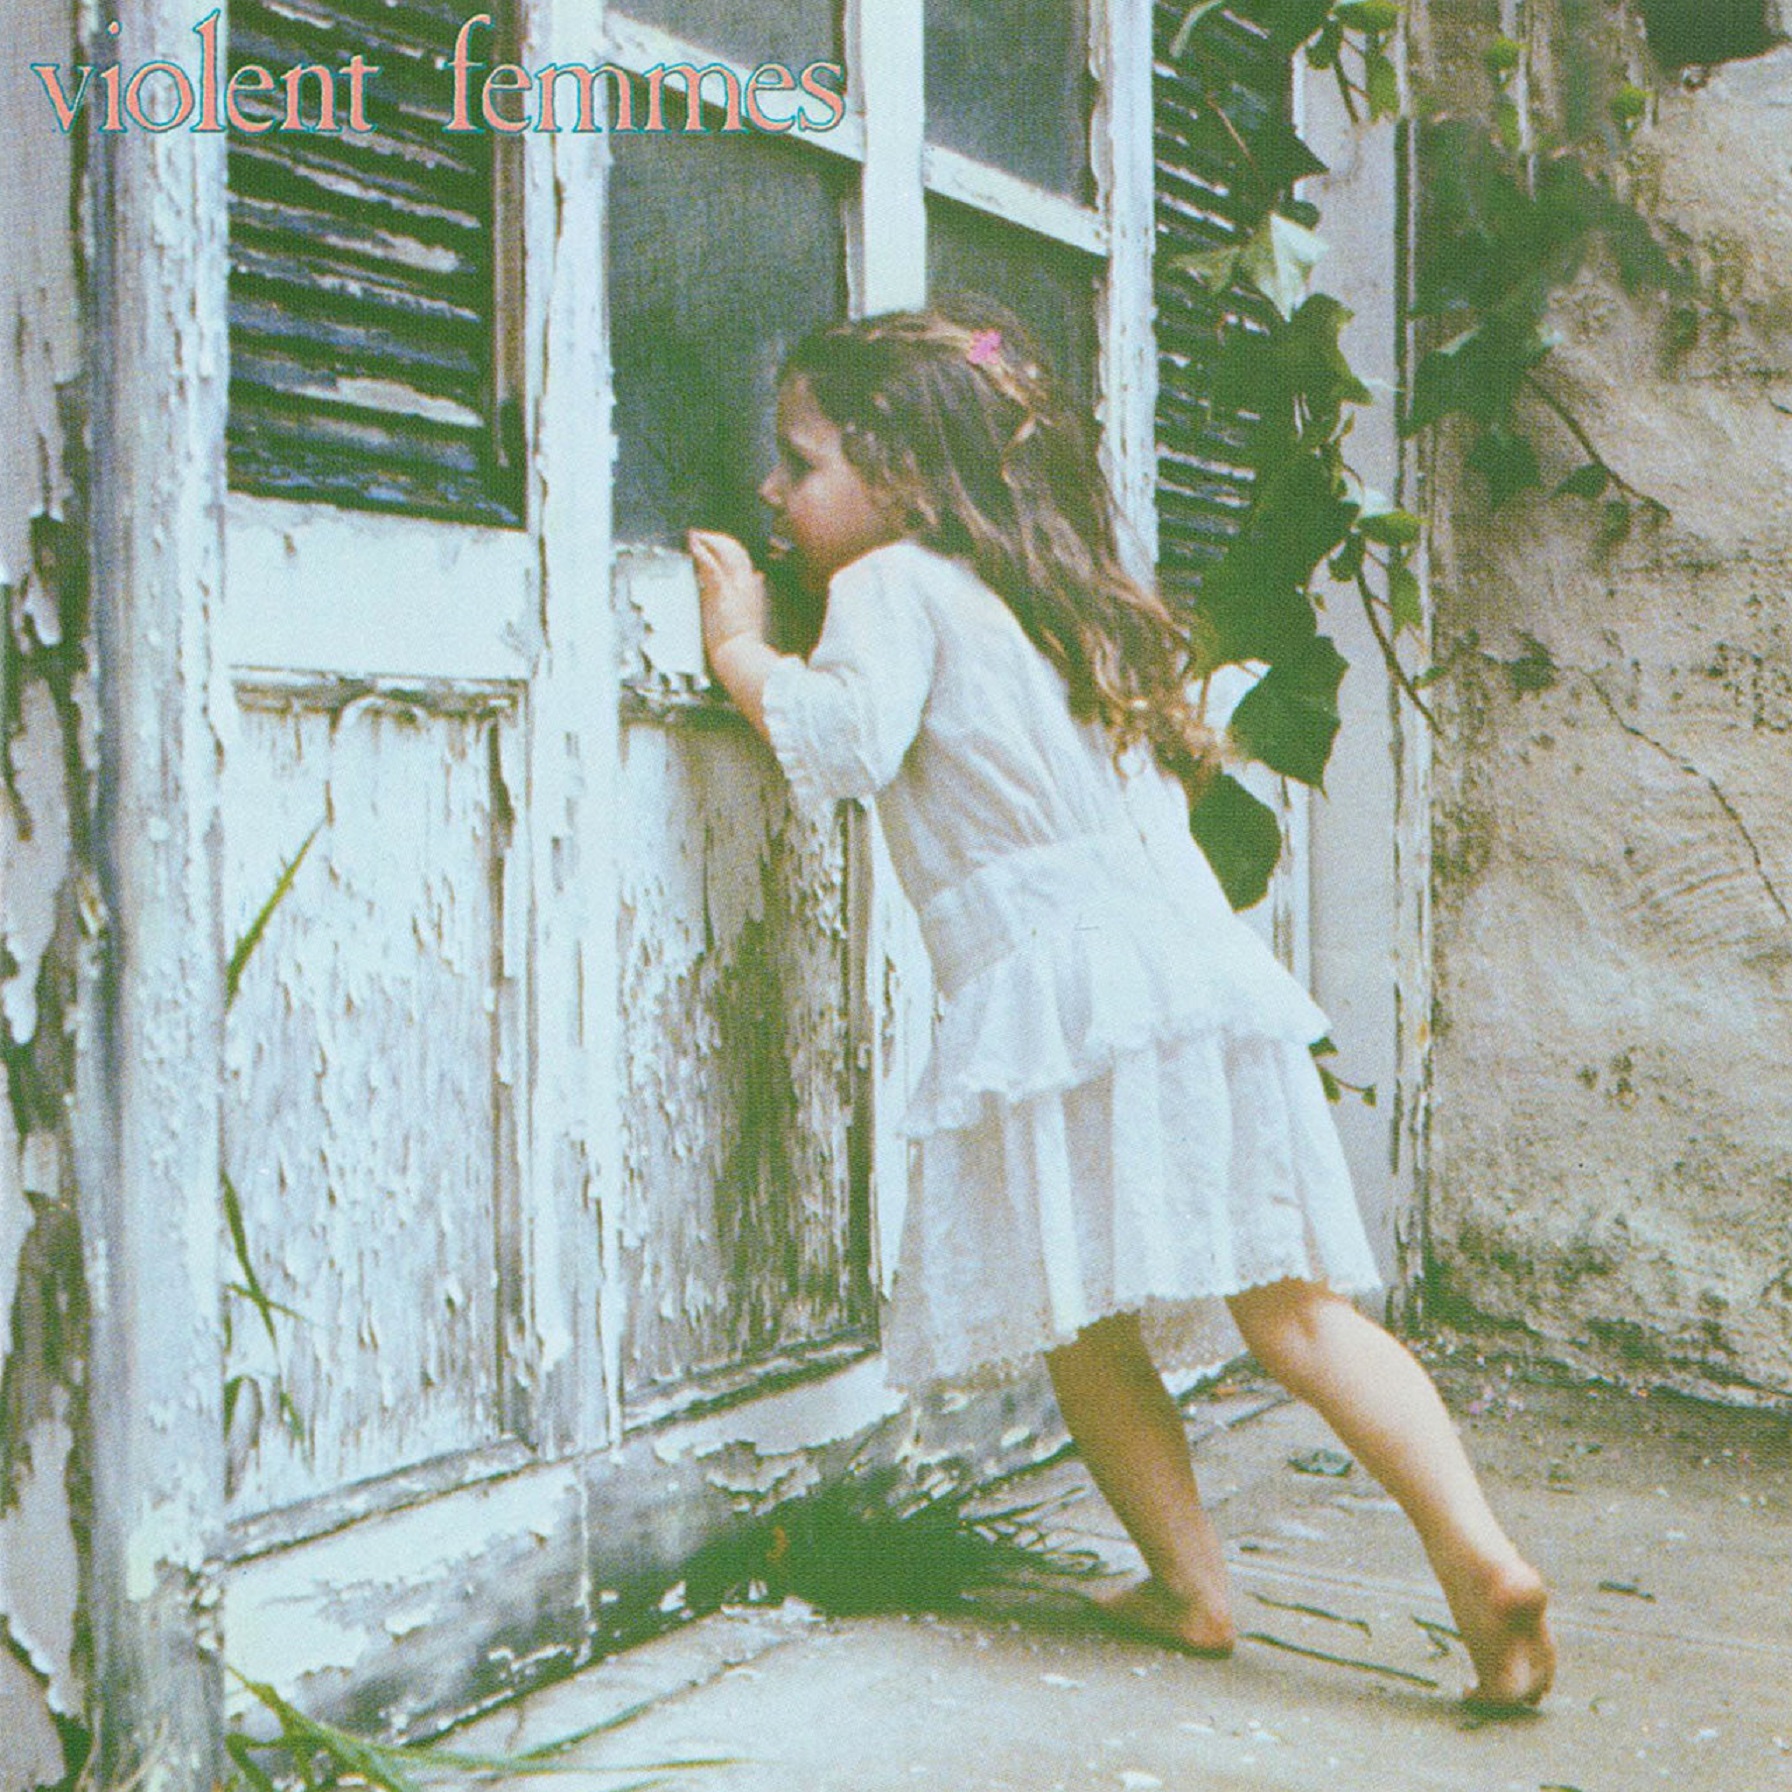 Violent Femmes To Perform Their Debut Album From Cover To Cover As Part Of Record’s 40th Anniversary Tour Celebration